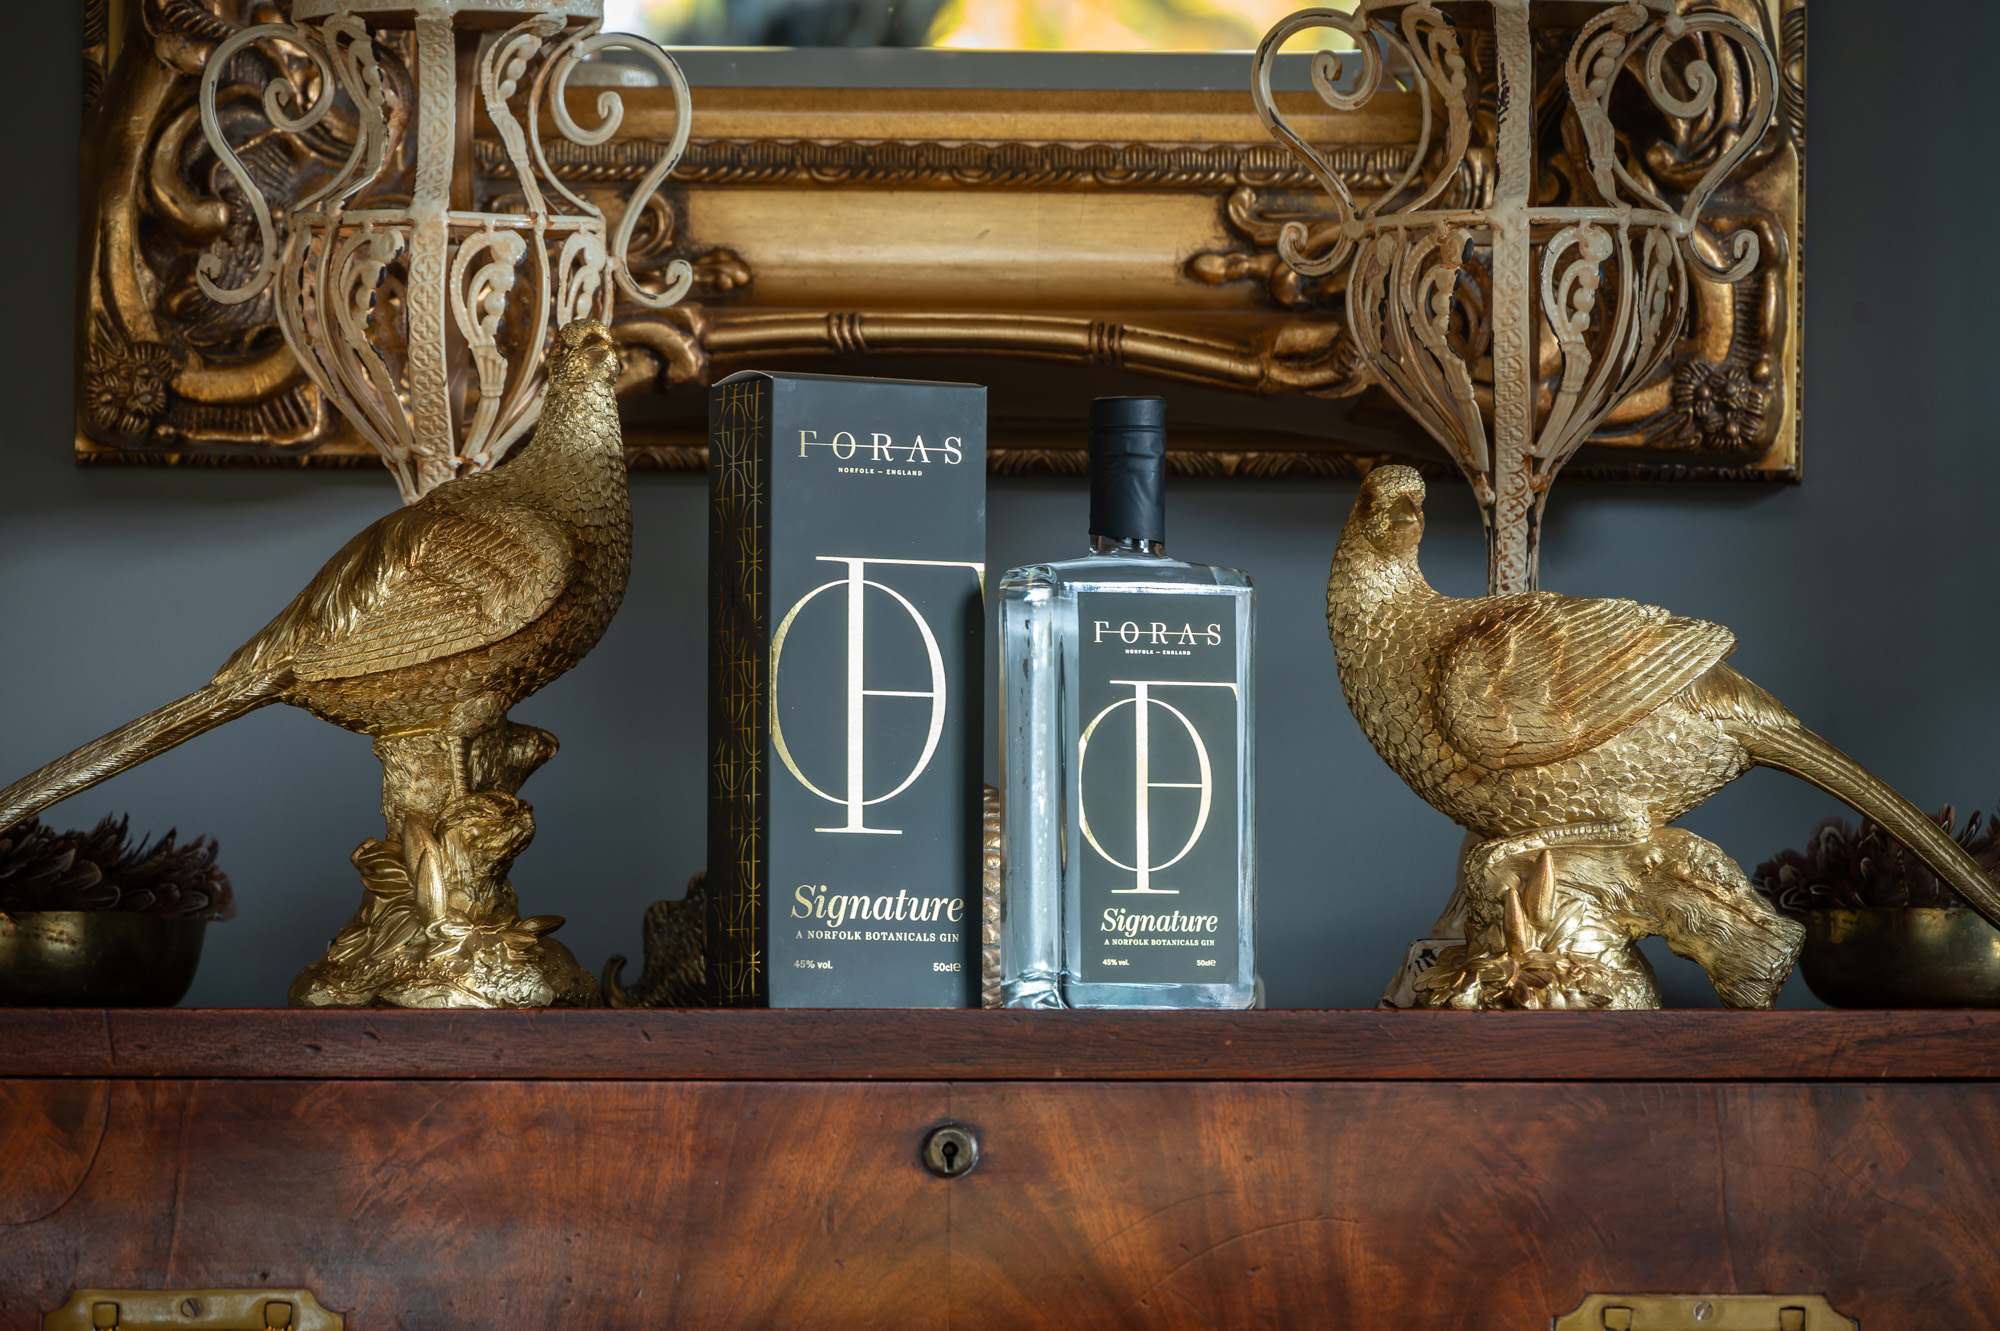 Celebrating 21 Years of Artisan Excellence: The Story of Our Signature Botanicals Gin